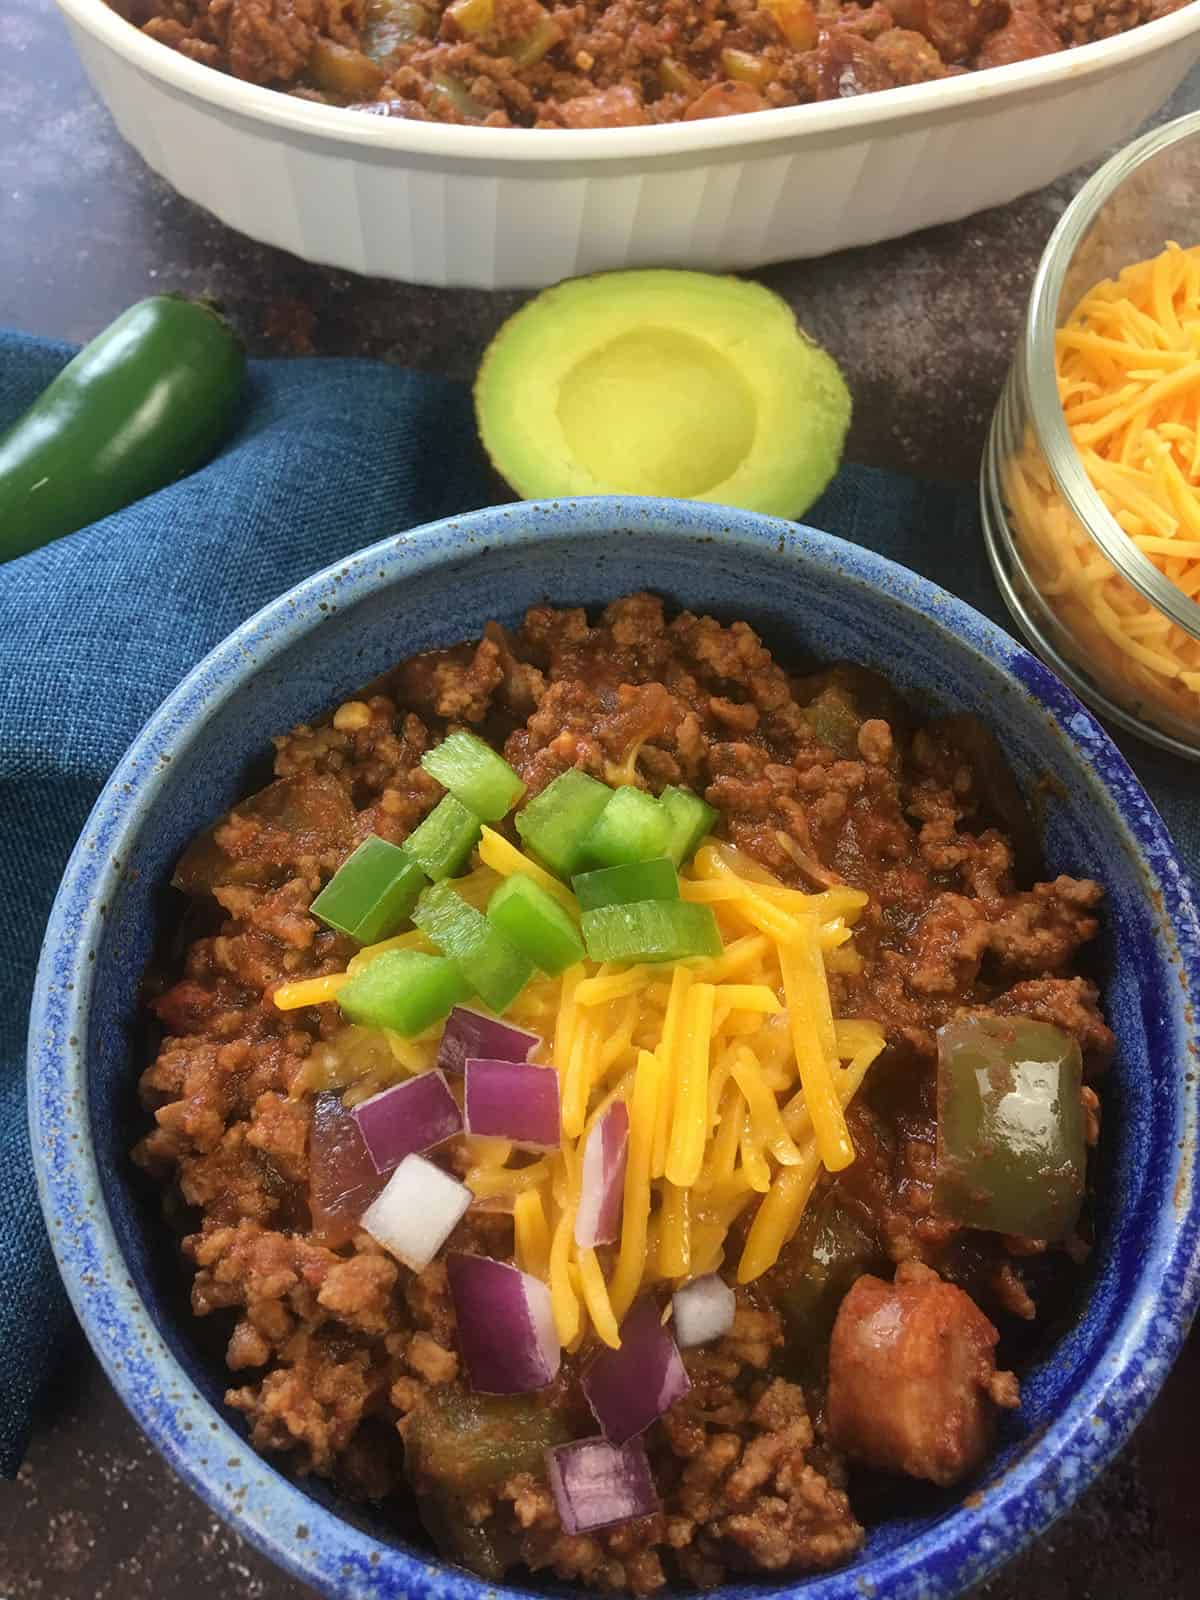 Cooked chili topped with shredded cheddar cheese, diced onions and jalapenos with avocado half and whole jalapeno in background.